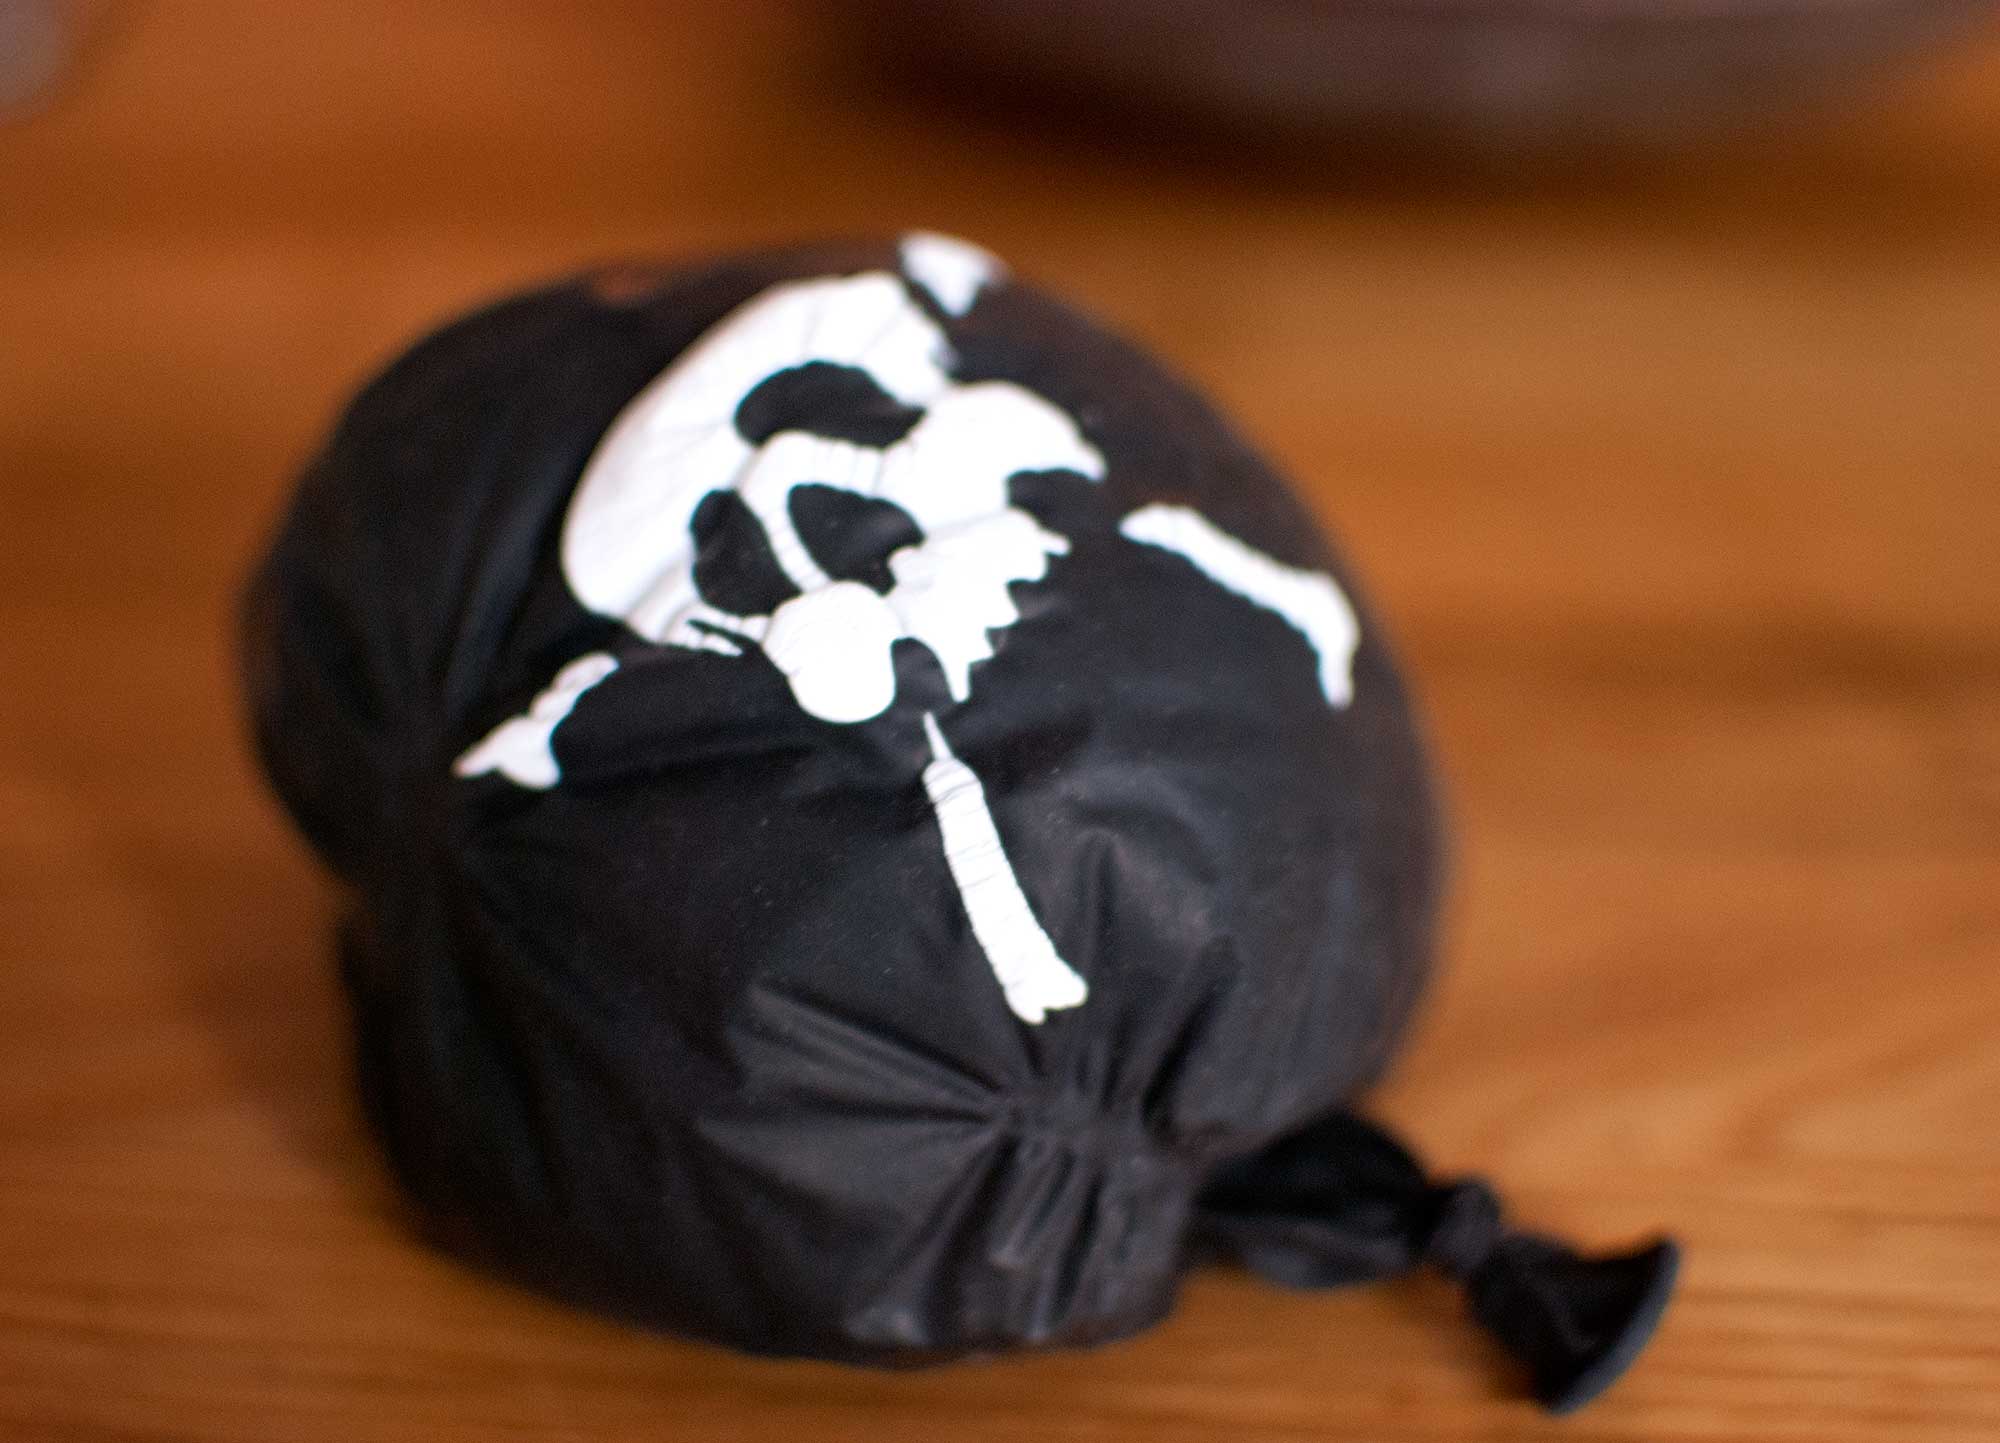 deflated scull and crossbones balloon